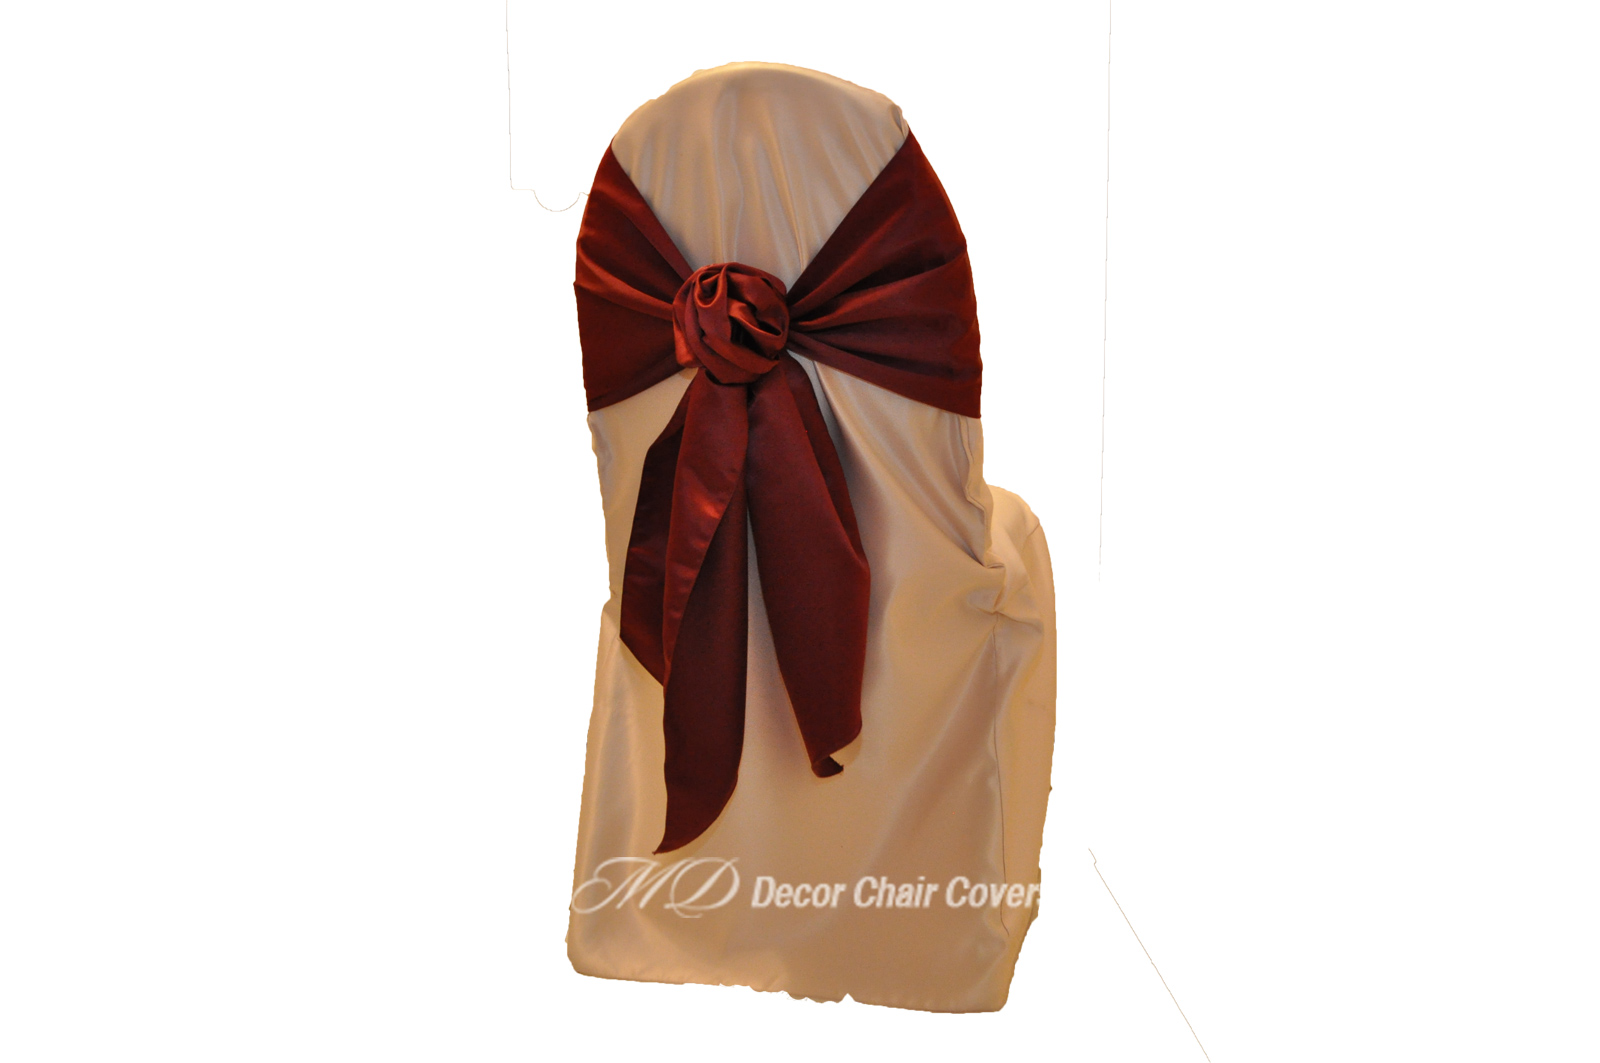 CHAMPAGNE-SATIN-LAMOUR-CHAIR-COVER